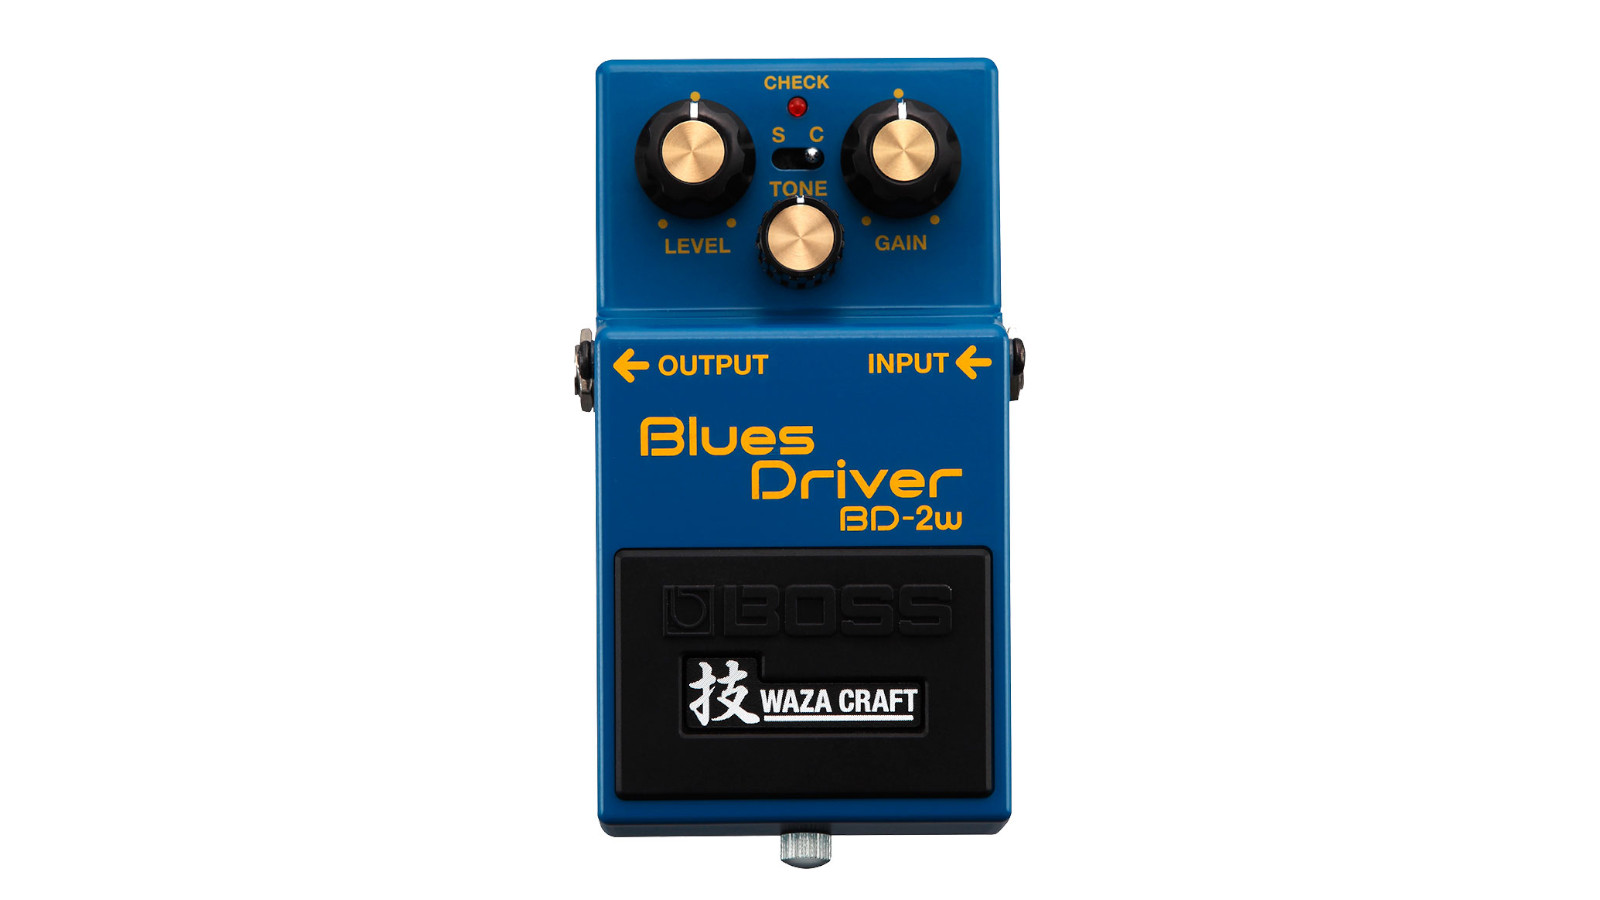 Best overdrive pedals: BOSS BD-2w Waza Craft